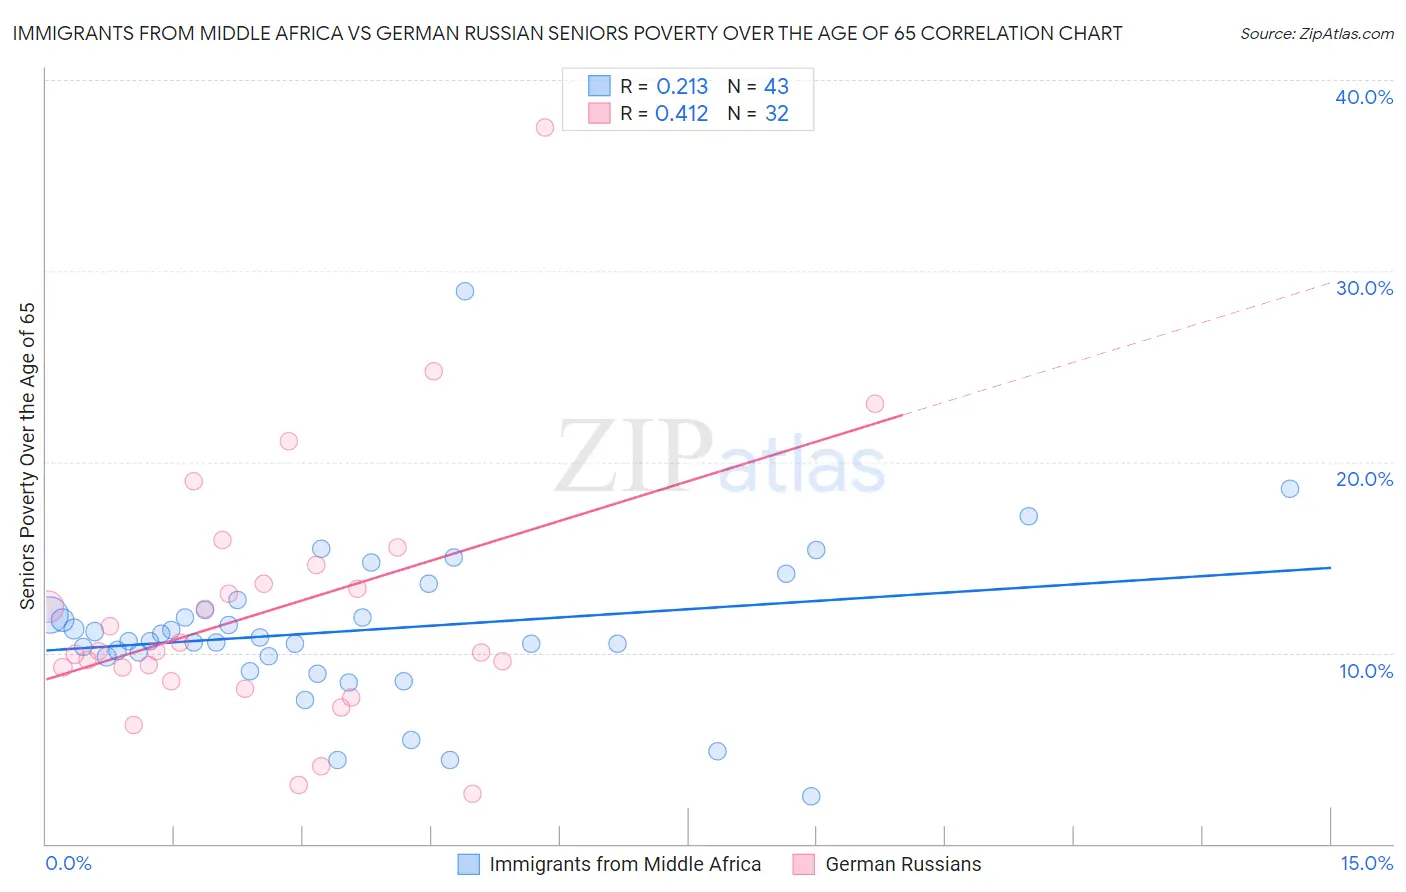 Immigrants from Middle Africa vs German Russian Seniors Poverty Over the Age of 65